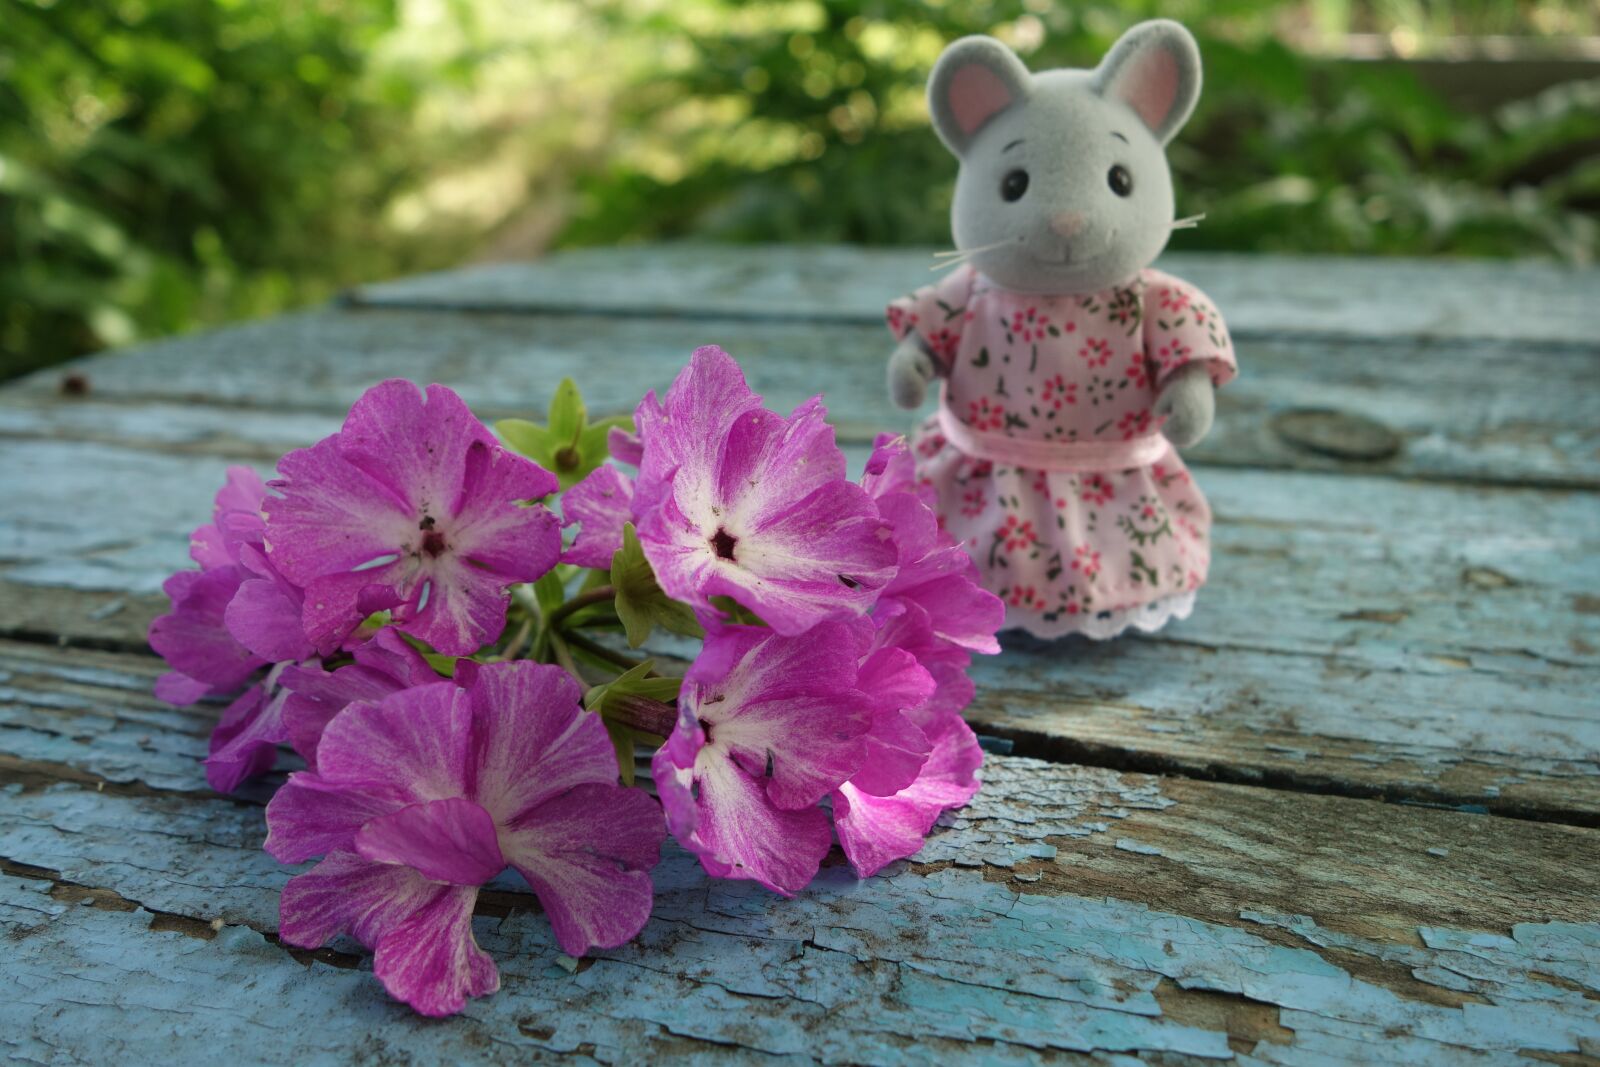 Sony Cyber-shot DSC-RX100 II sample photo. Flowers, mouse, toy photography